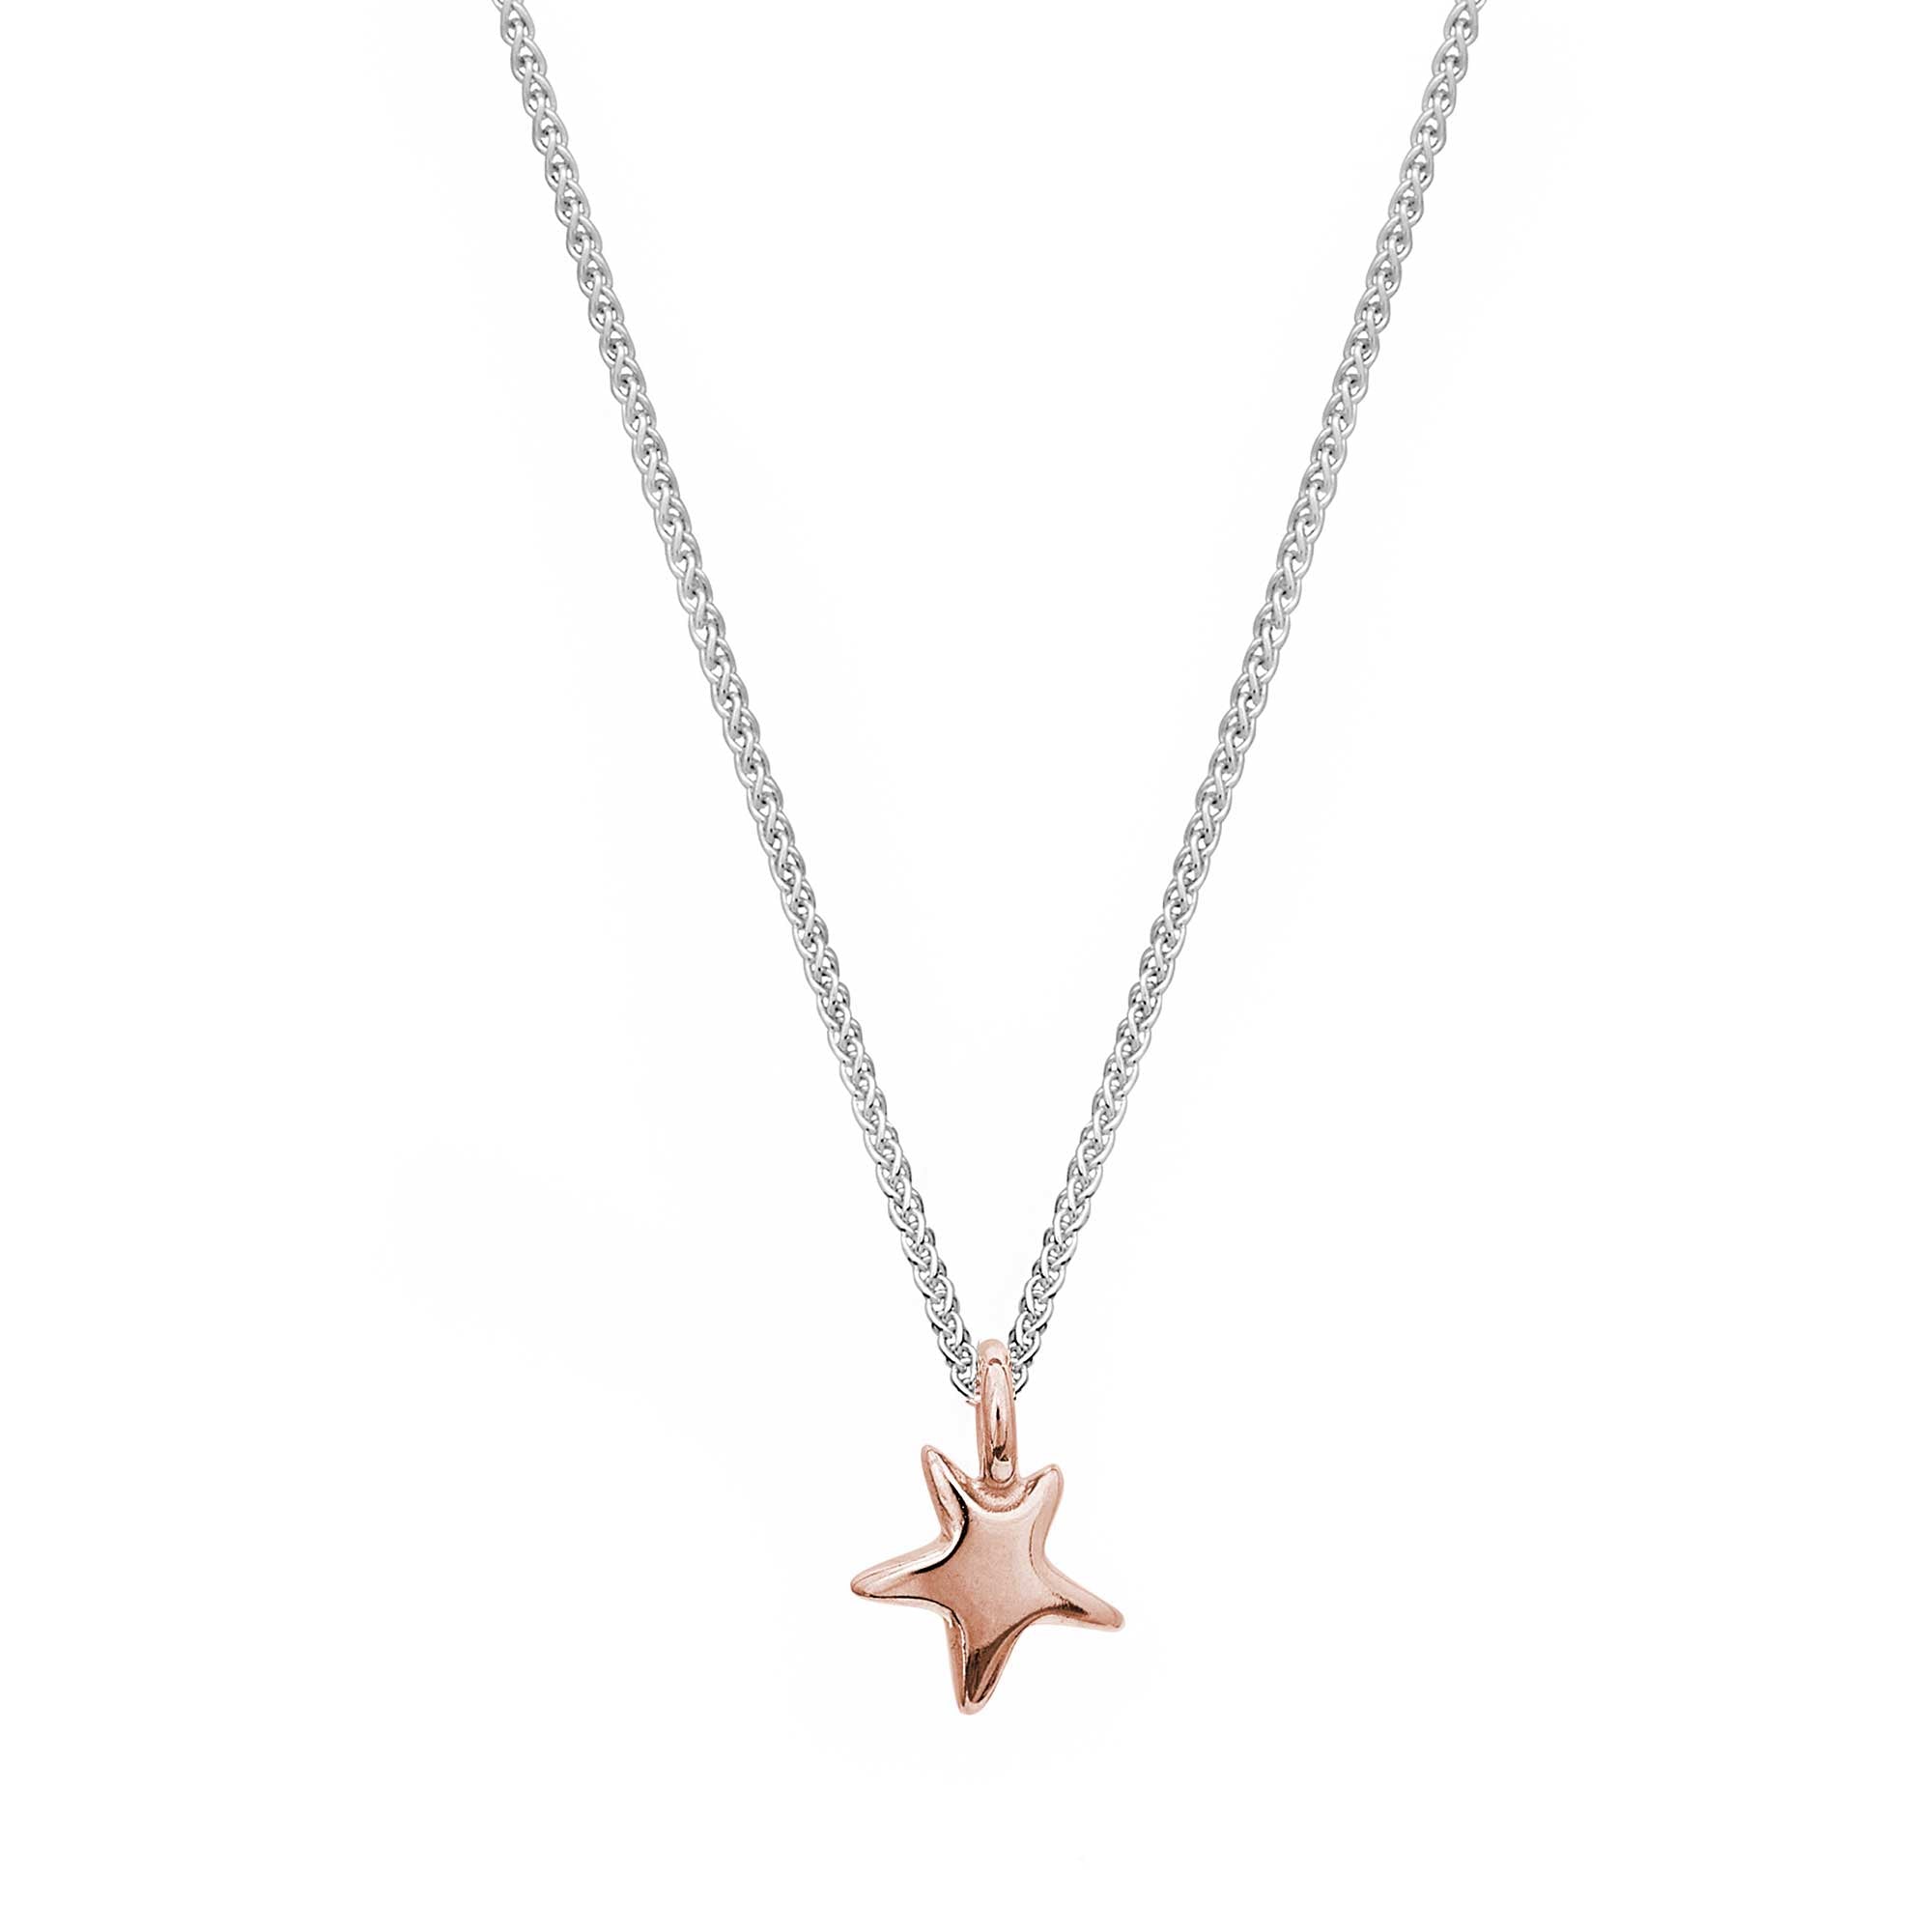 Delicate solid rose gold and silver star pendant for teens young womens gift designer Scarlett Jewellery